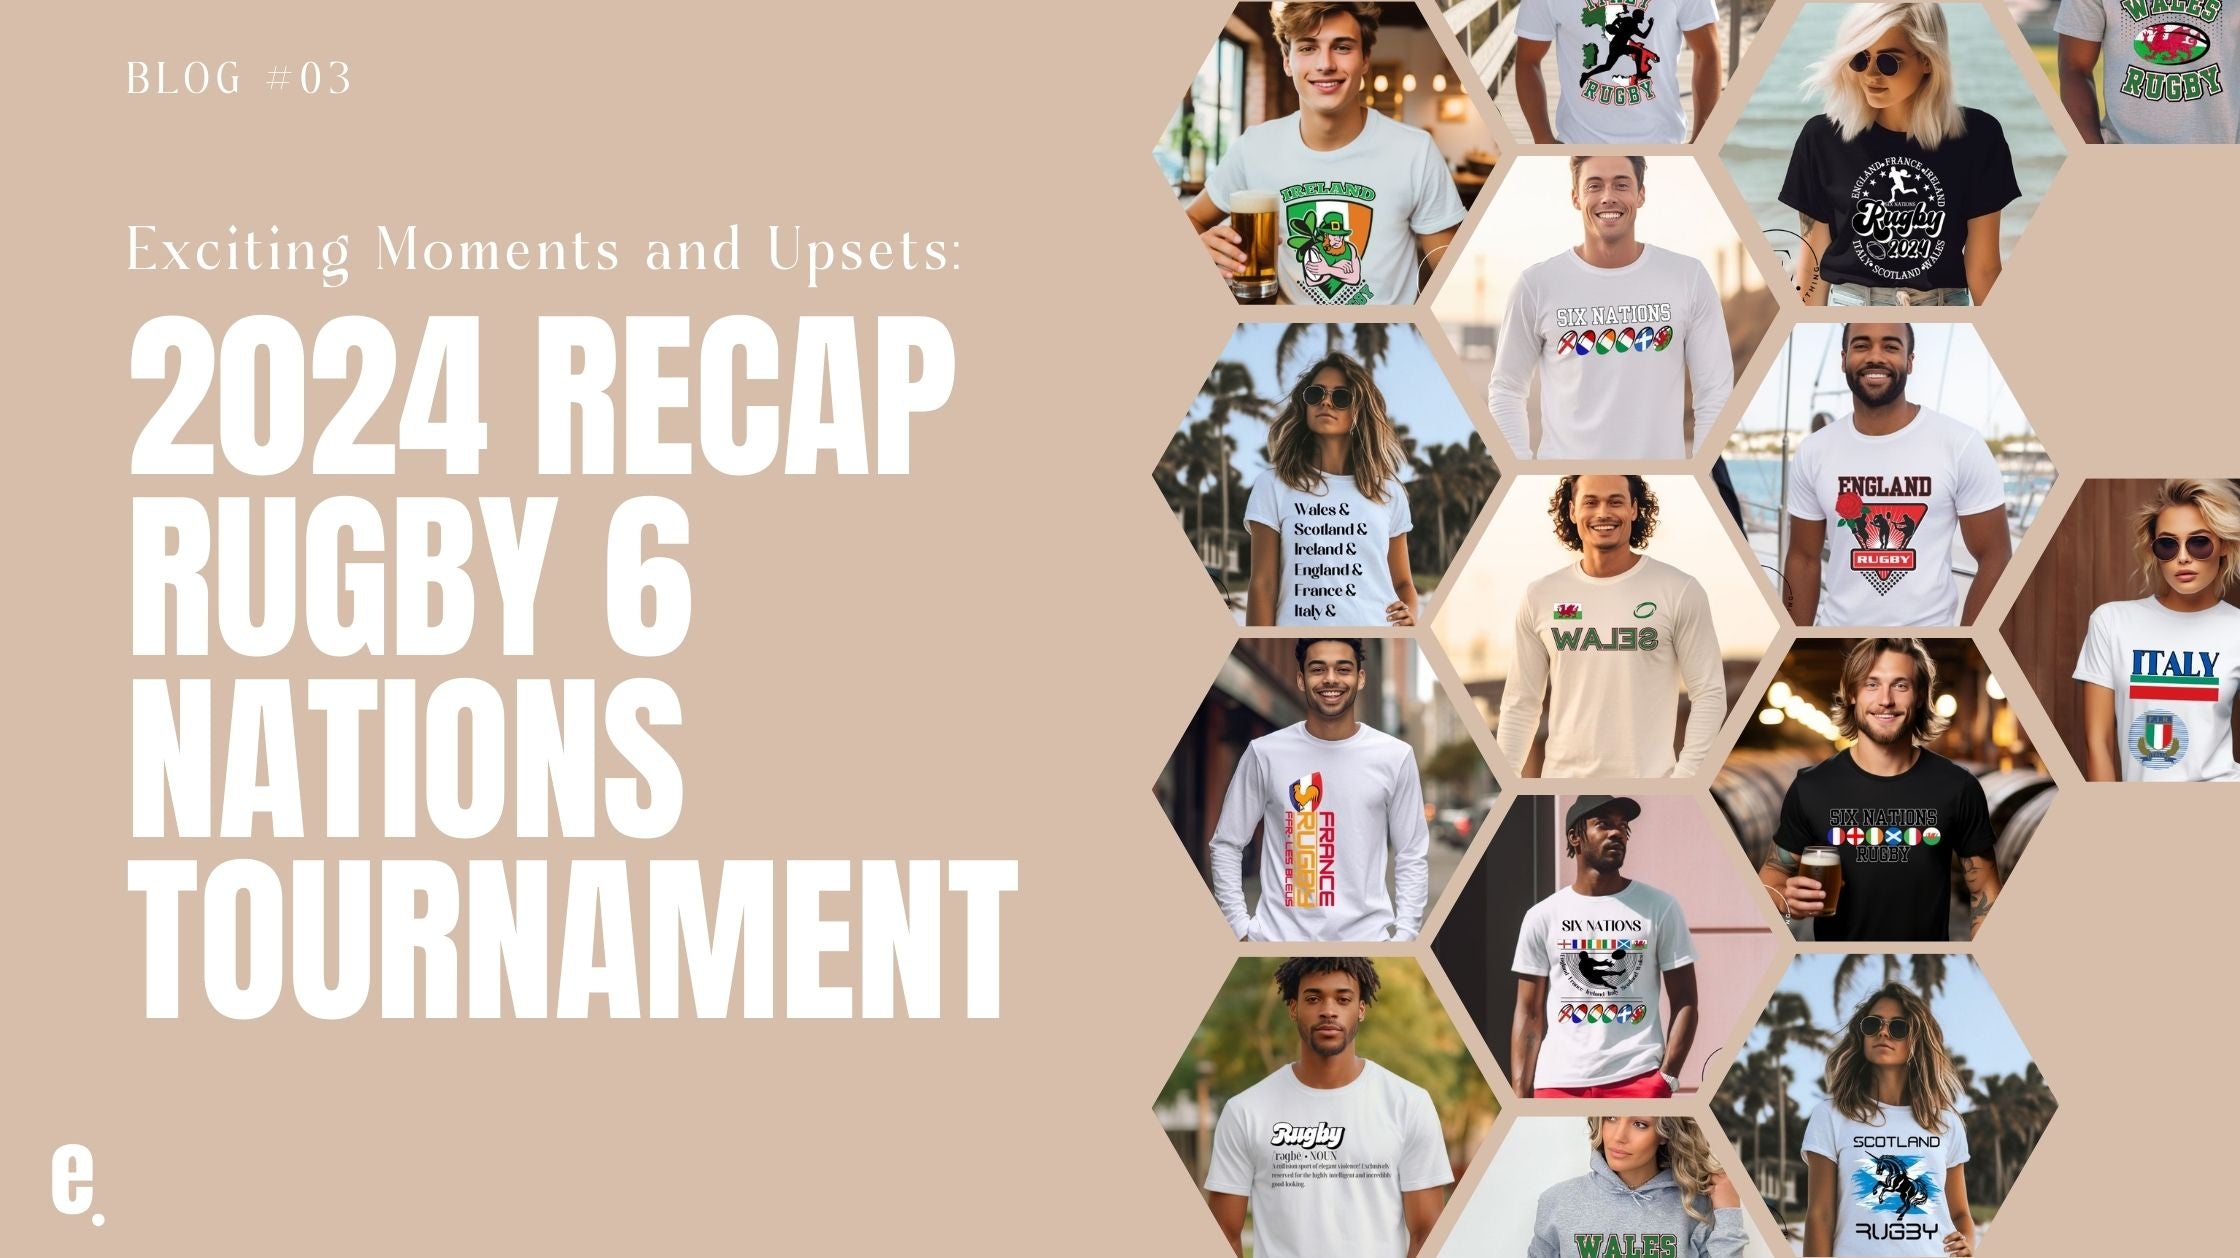 Exciting Moments and Upsets: A Recap of the 2024 Rugby 6 Nations Tournament